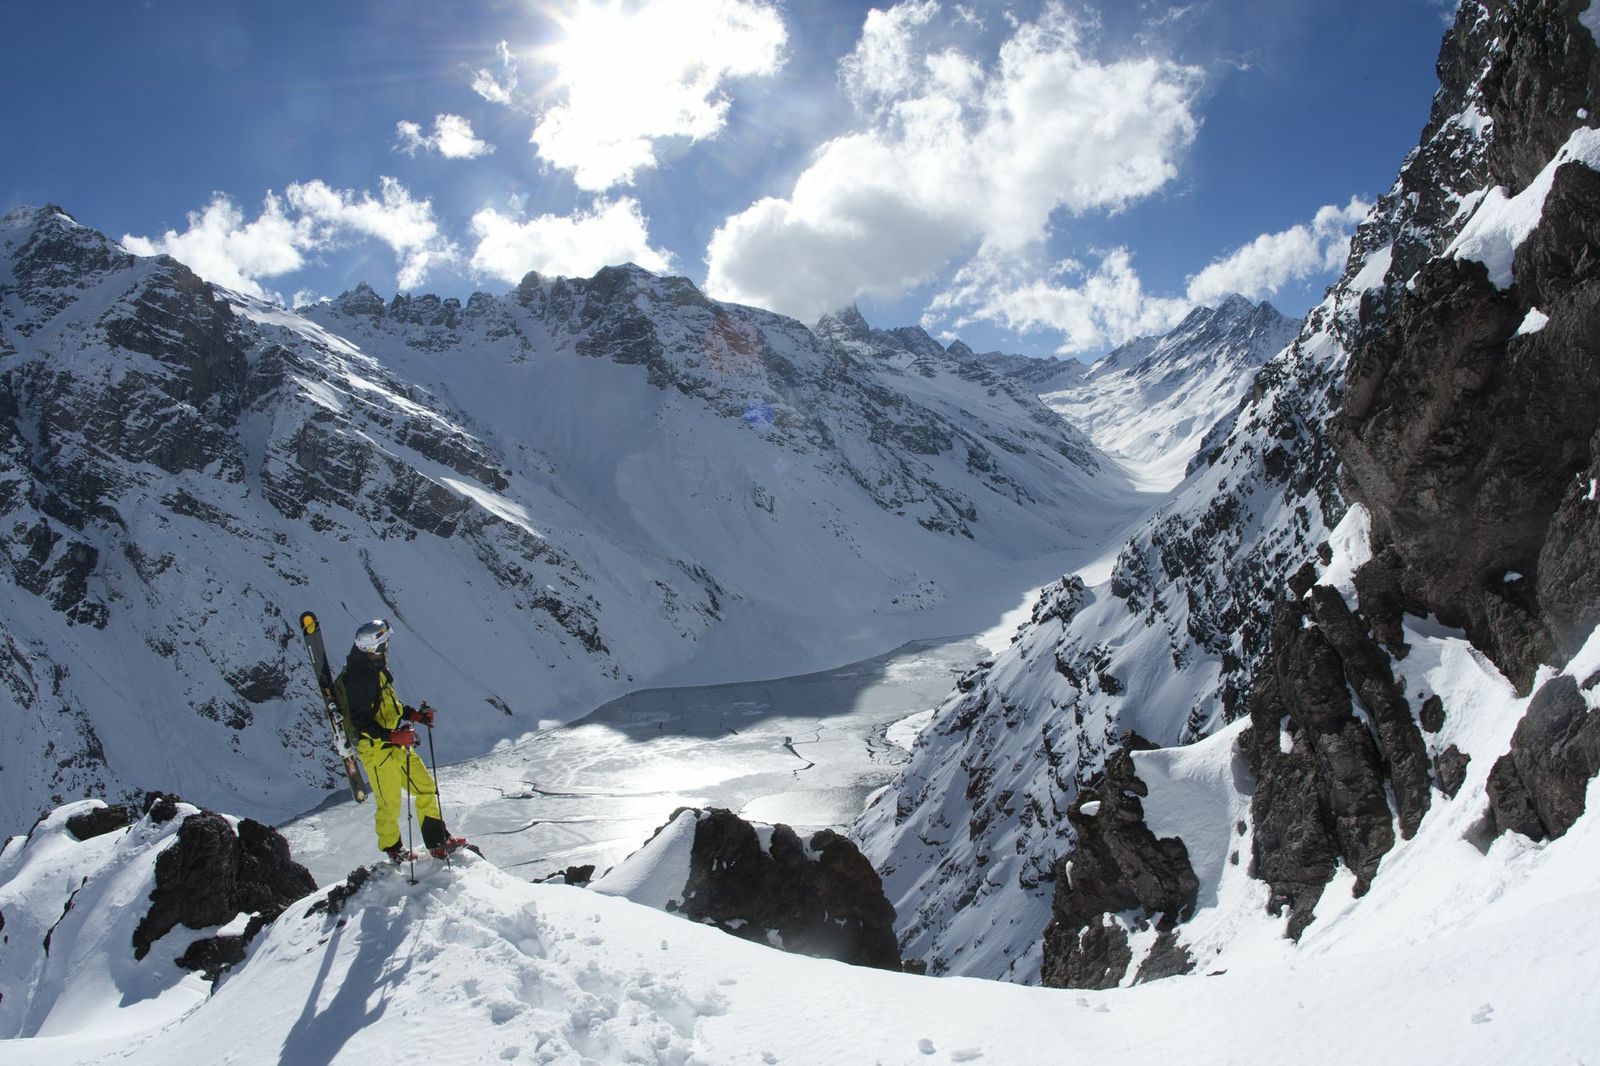 Ski Portillo. Photo by Adam Clark. Skiing as if you were in your own private ski resort. 